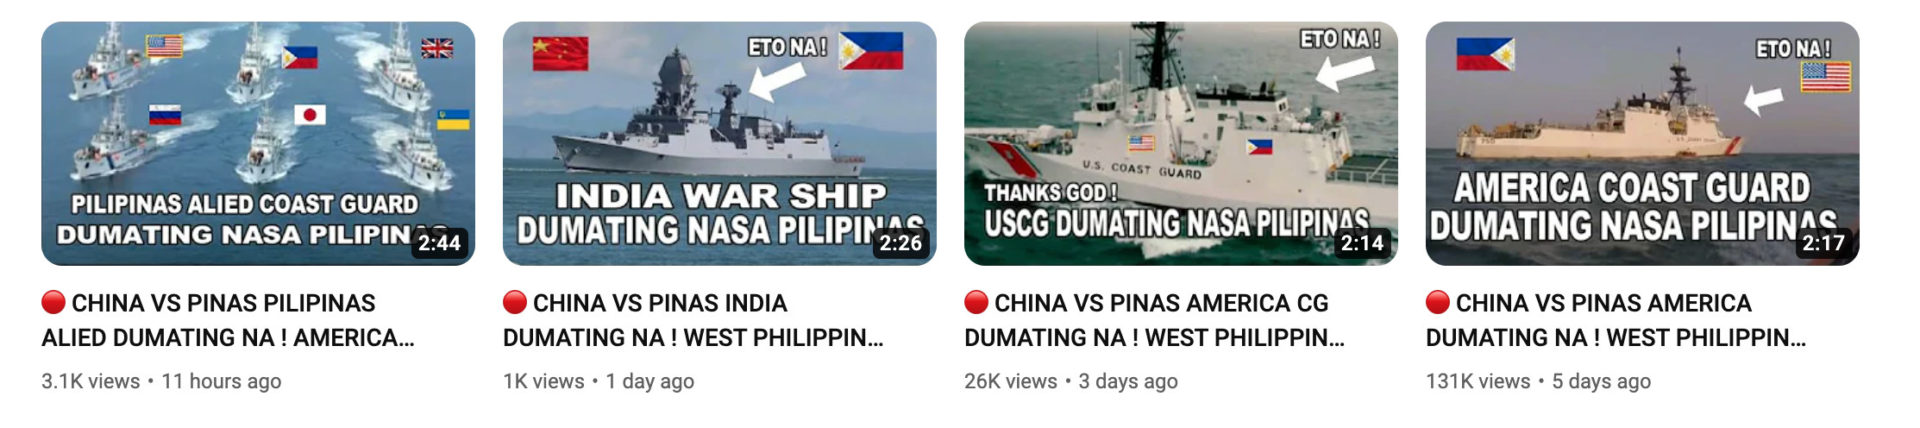 Videos uploaded from Dec. 10 to 15 by the YouTube channel Ella Vloggs claim that back-ups from the U.S., India, U.K., Russia, Ukraine, and Japan arrived to help the Philippines defend itself from China. Screenshot by Celine Samson.